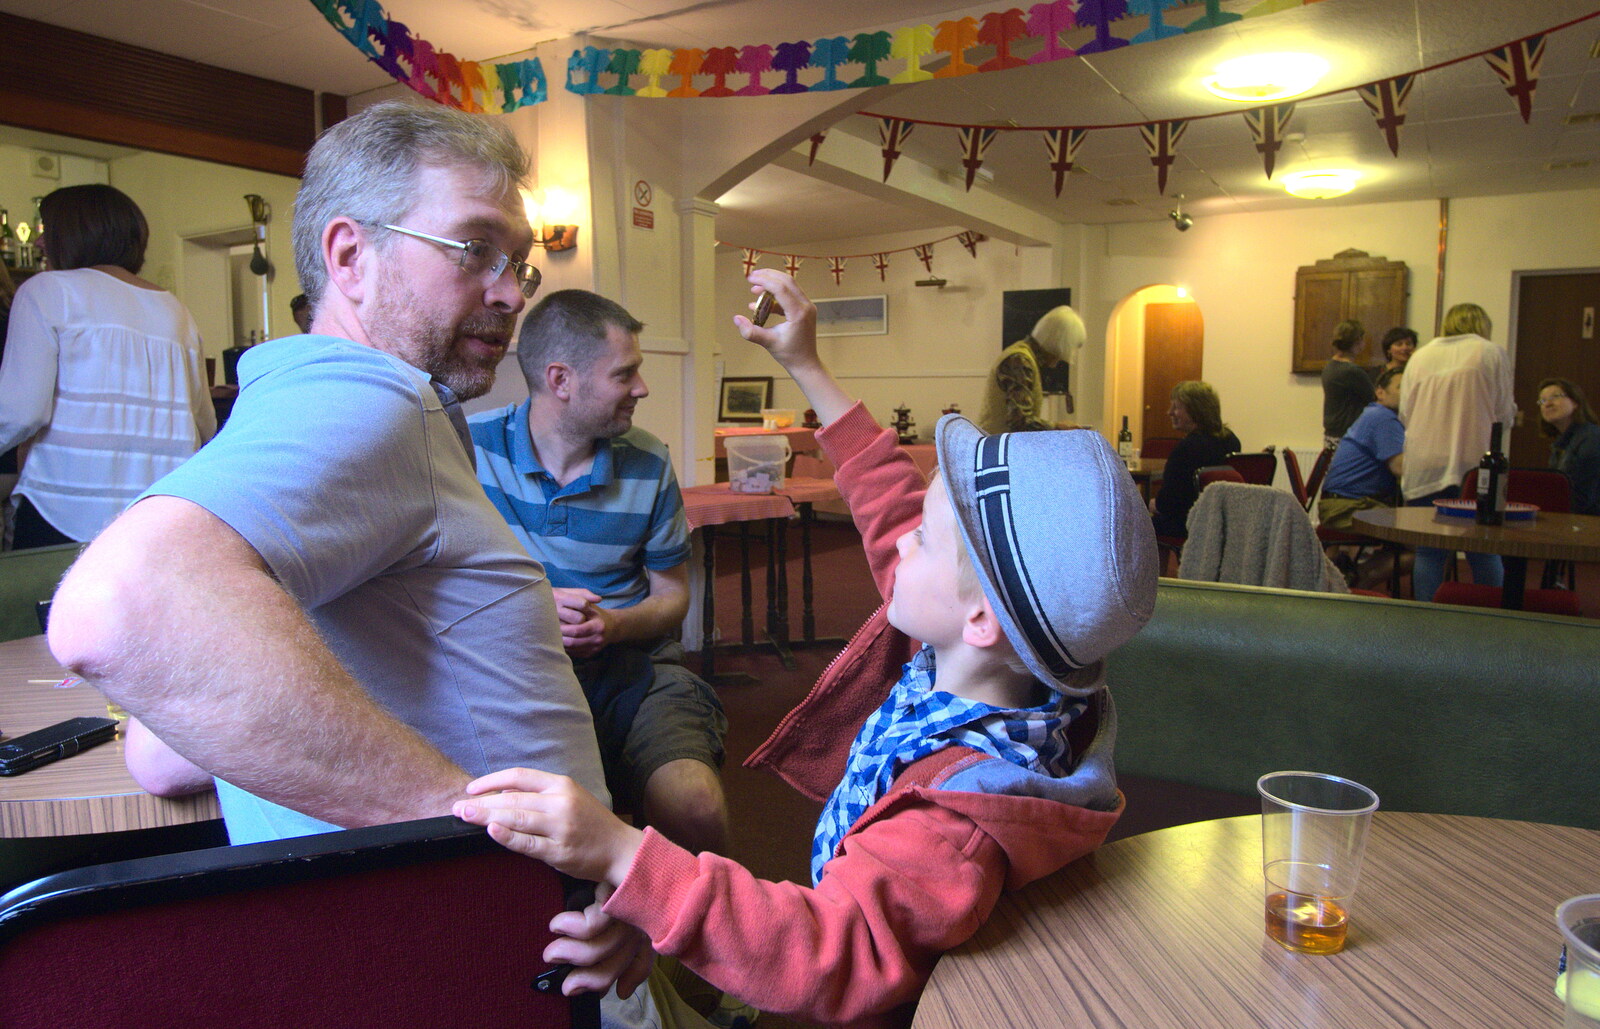 Marc interacts with Harry from The Queen's Village Hall Birthday, Brome, Suffolk - 12th June 2016